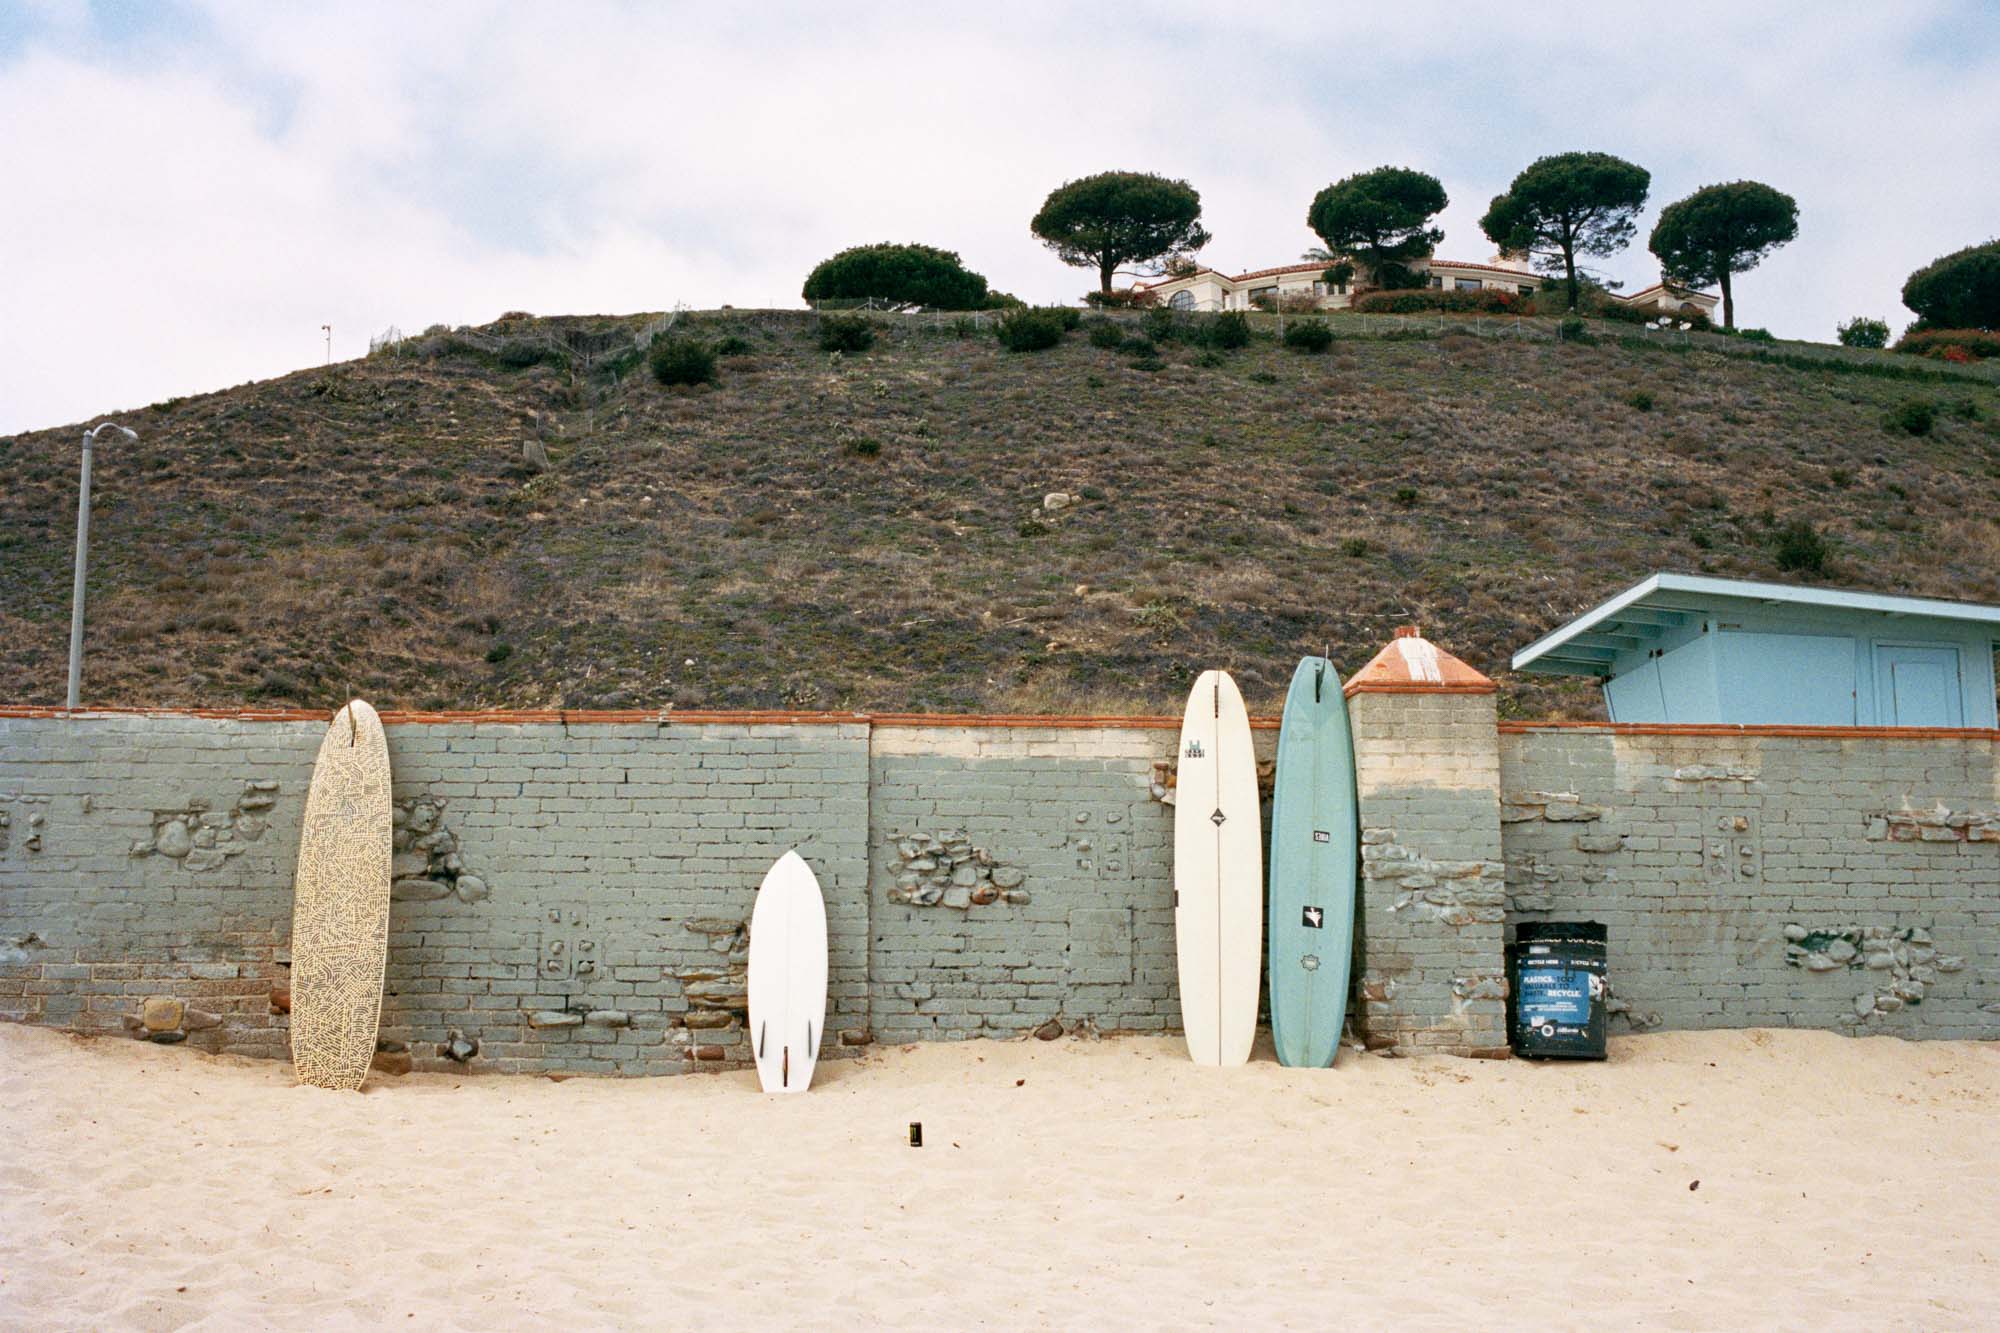 Surfboards lean on an old brick wall on Mailbu point surf break. There is a big hill with a house in the background